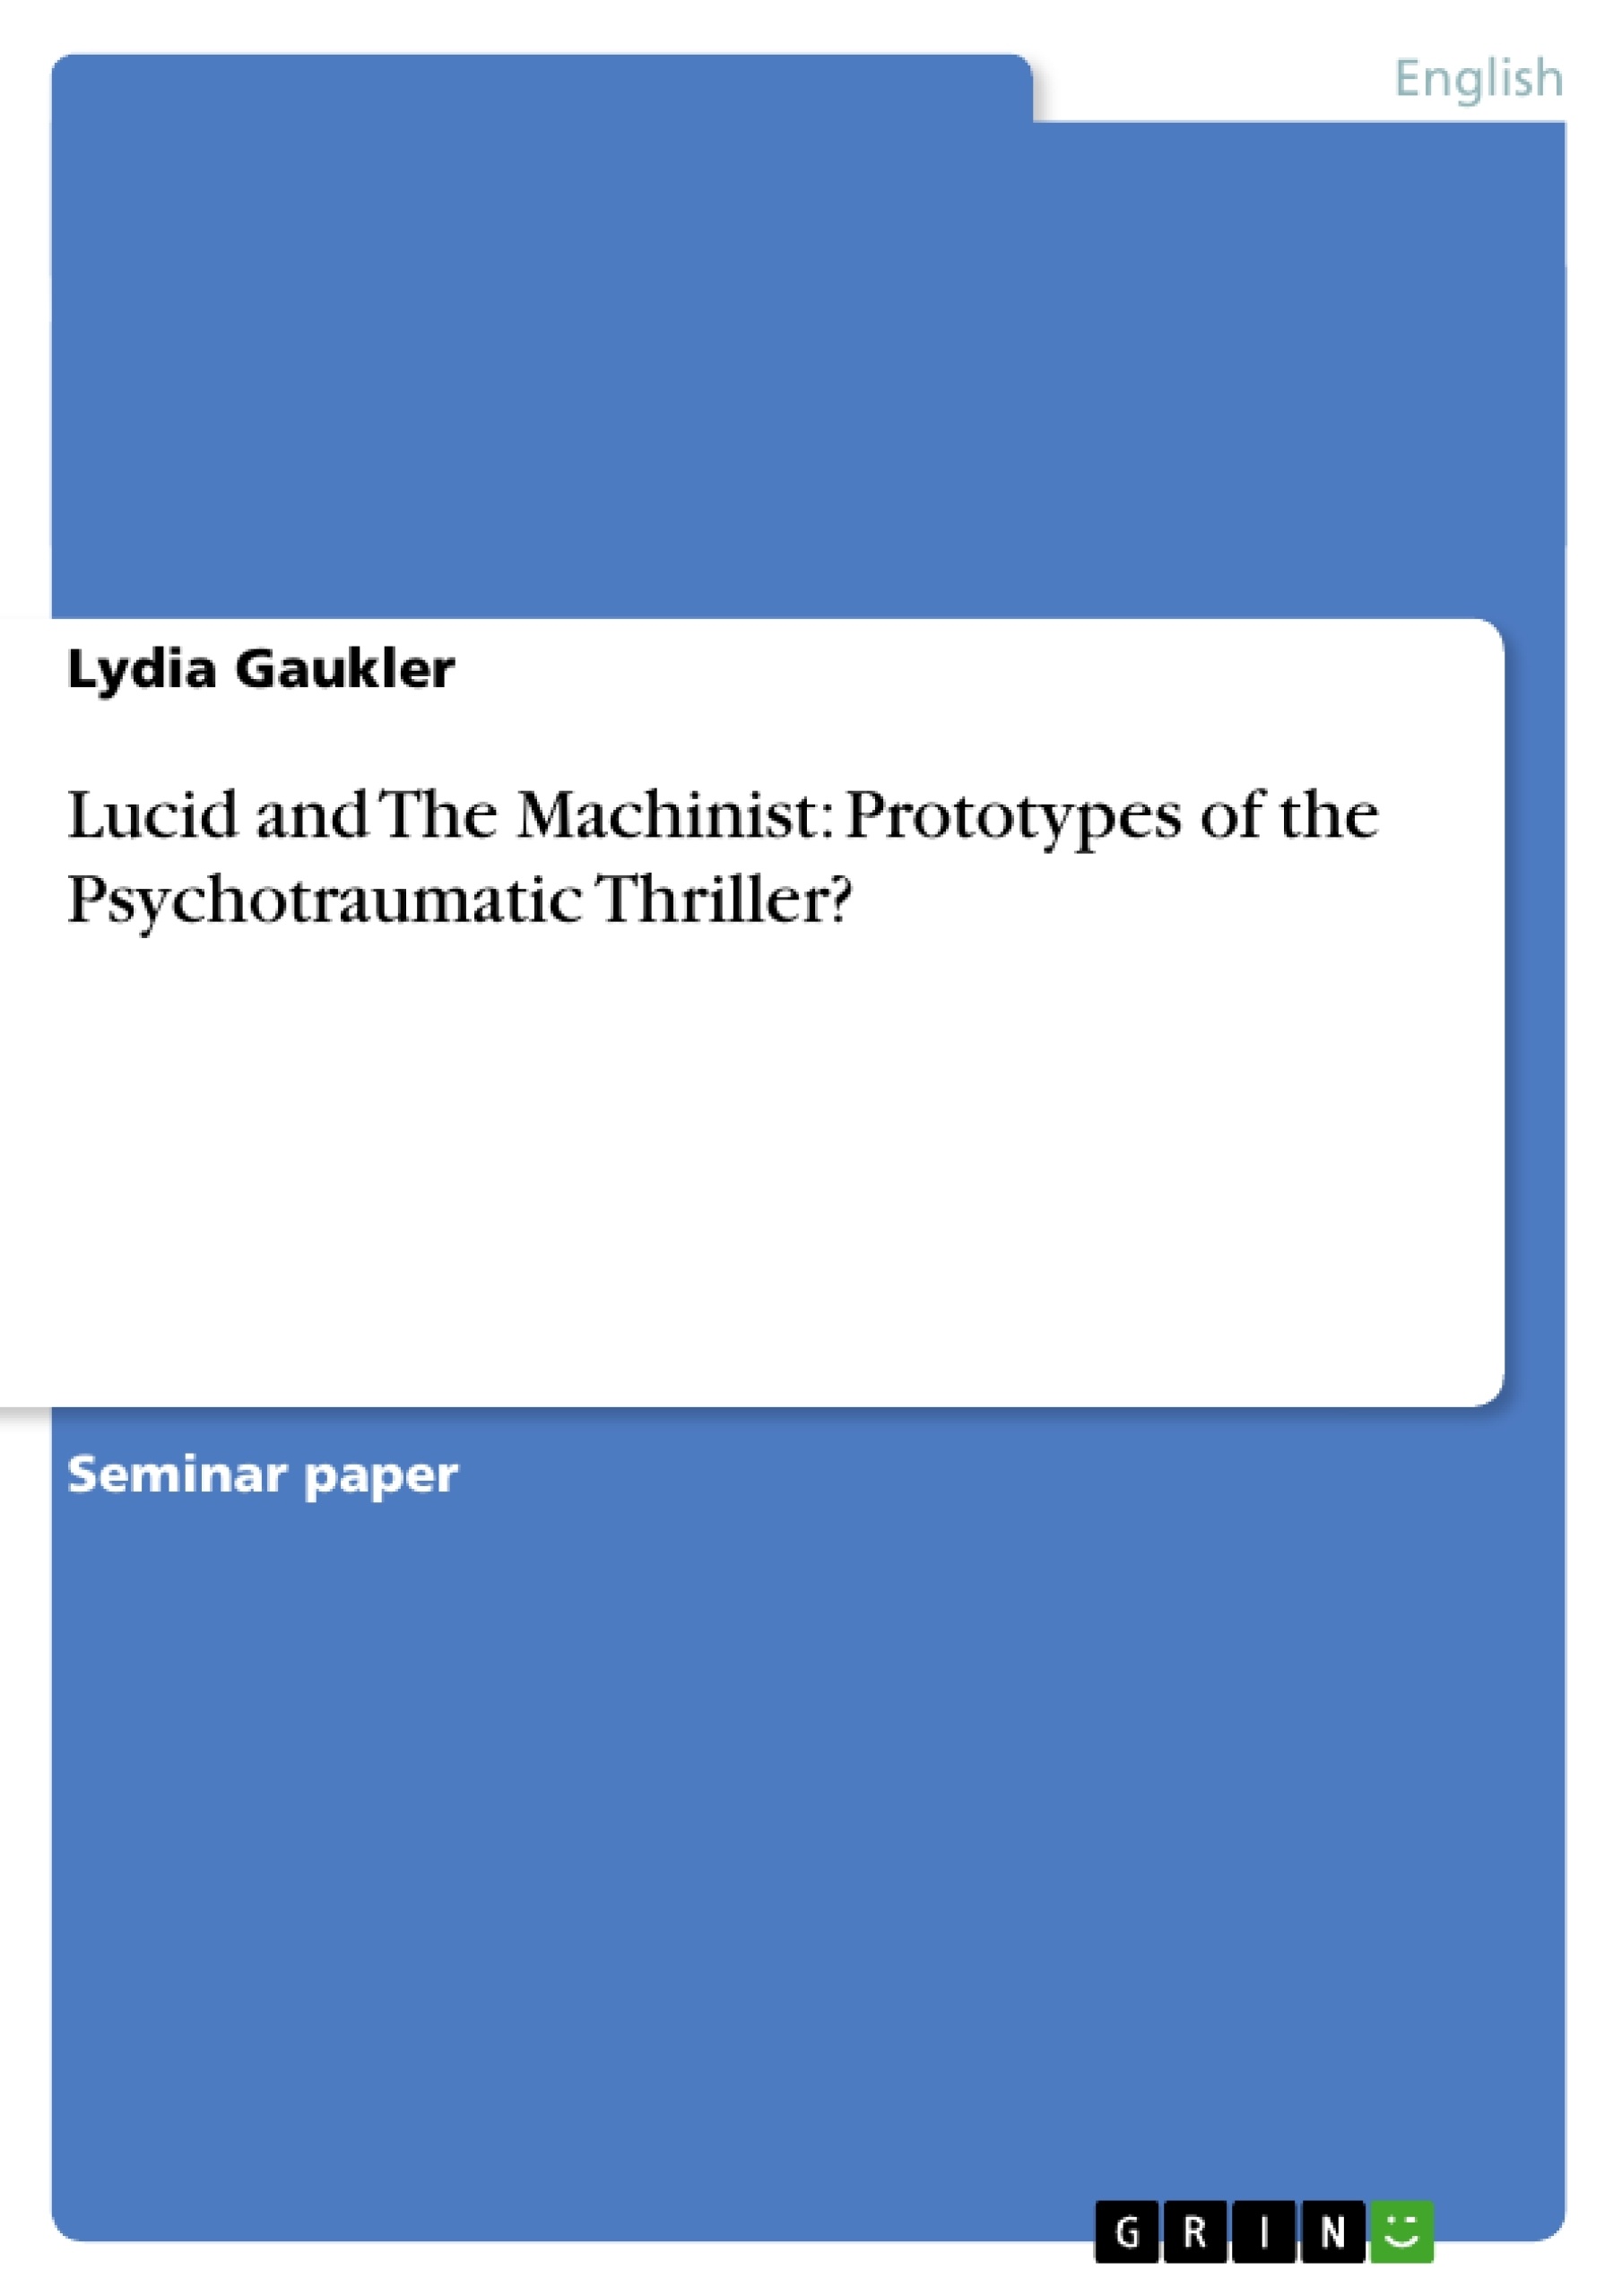 Titre: Lucid and The Machinist: Prototypes of the Psychotraumatic Thriller?